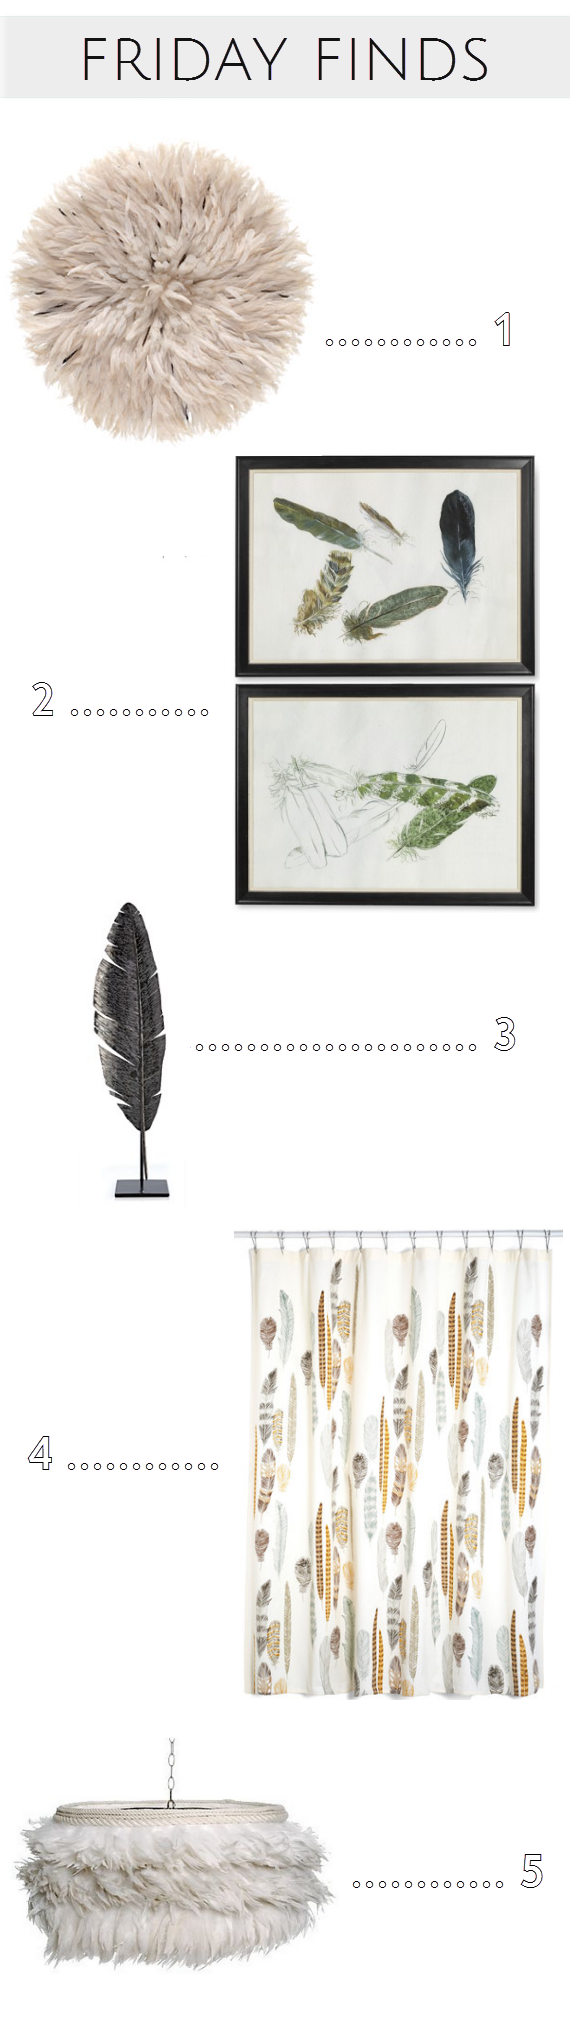 feather pattern decor finds - www.simplifiedbee.com #feathers